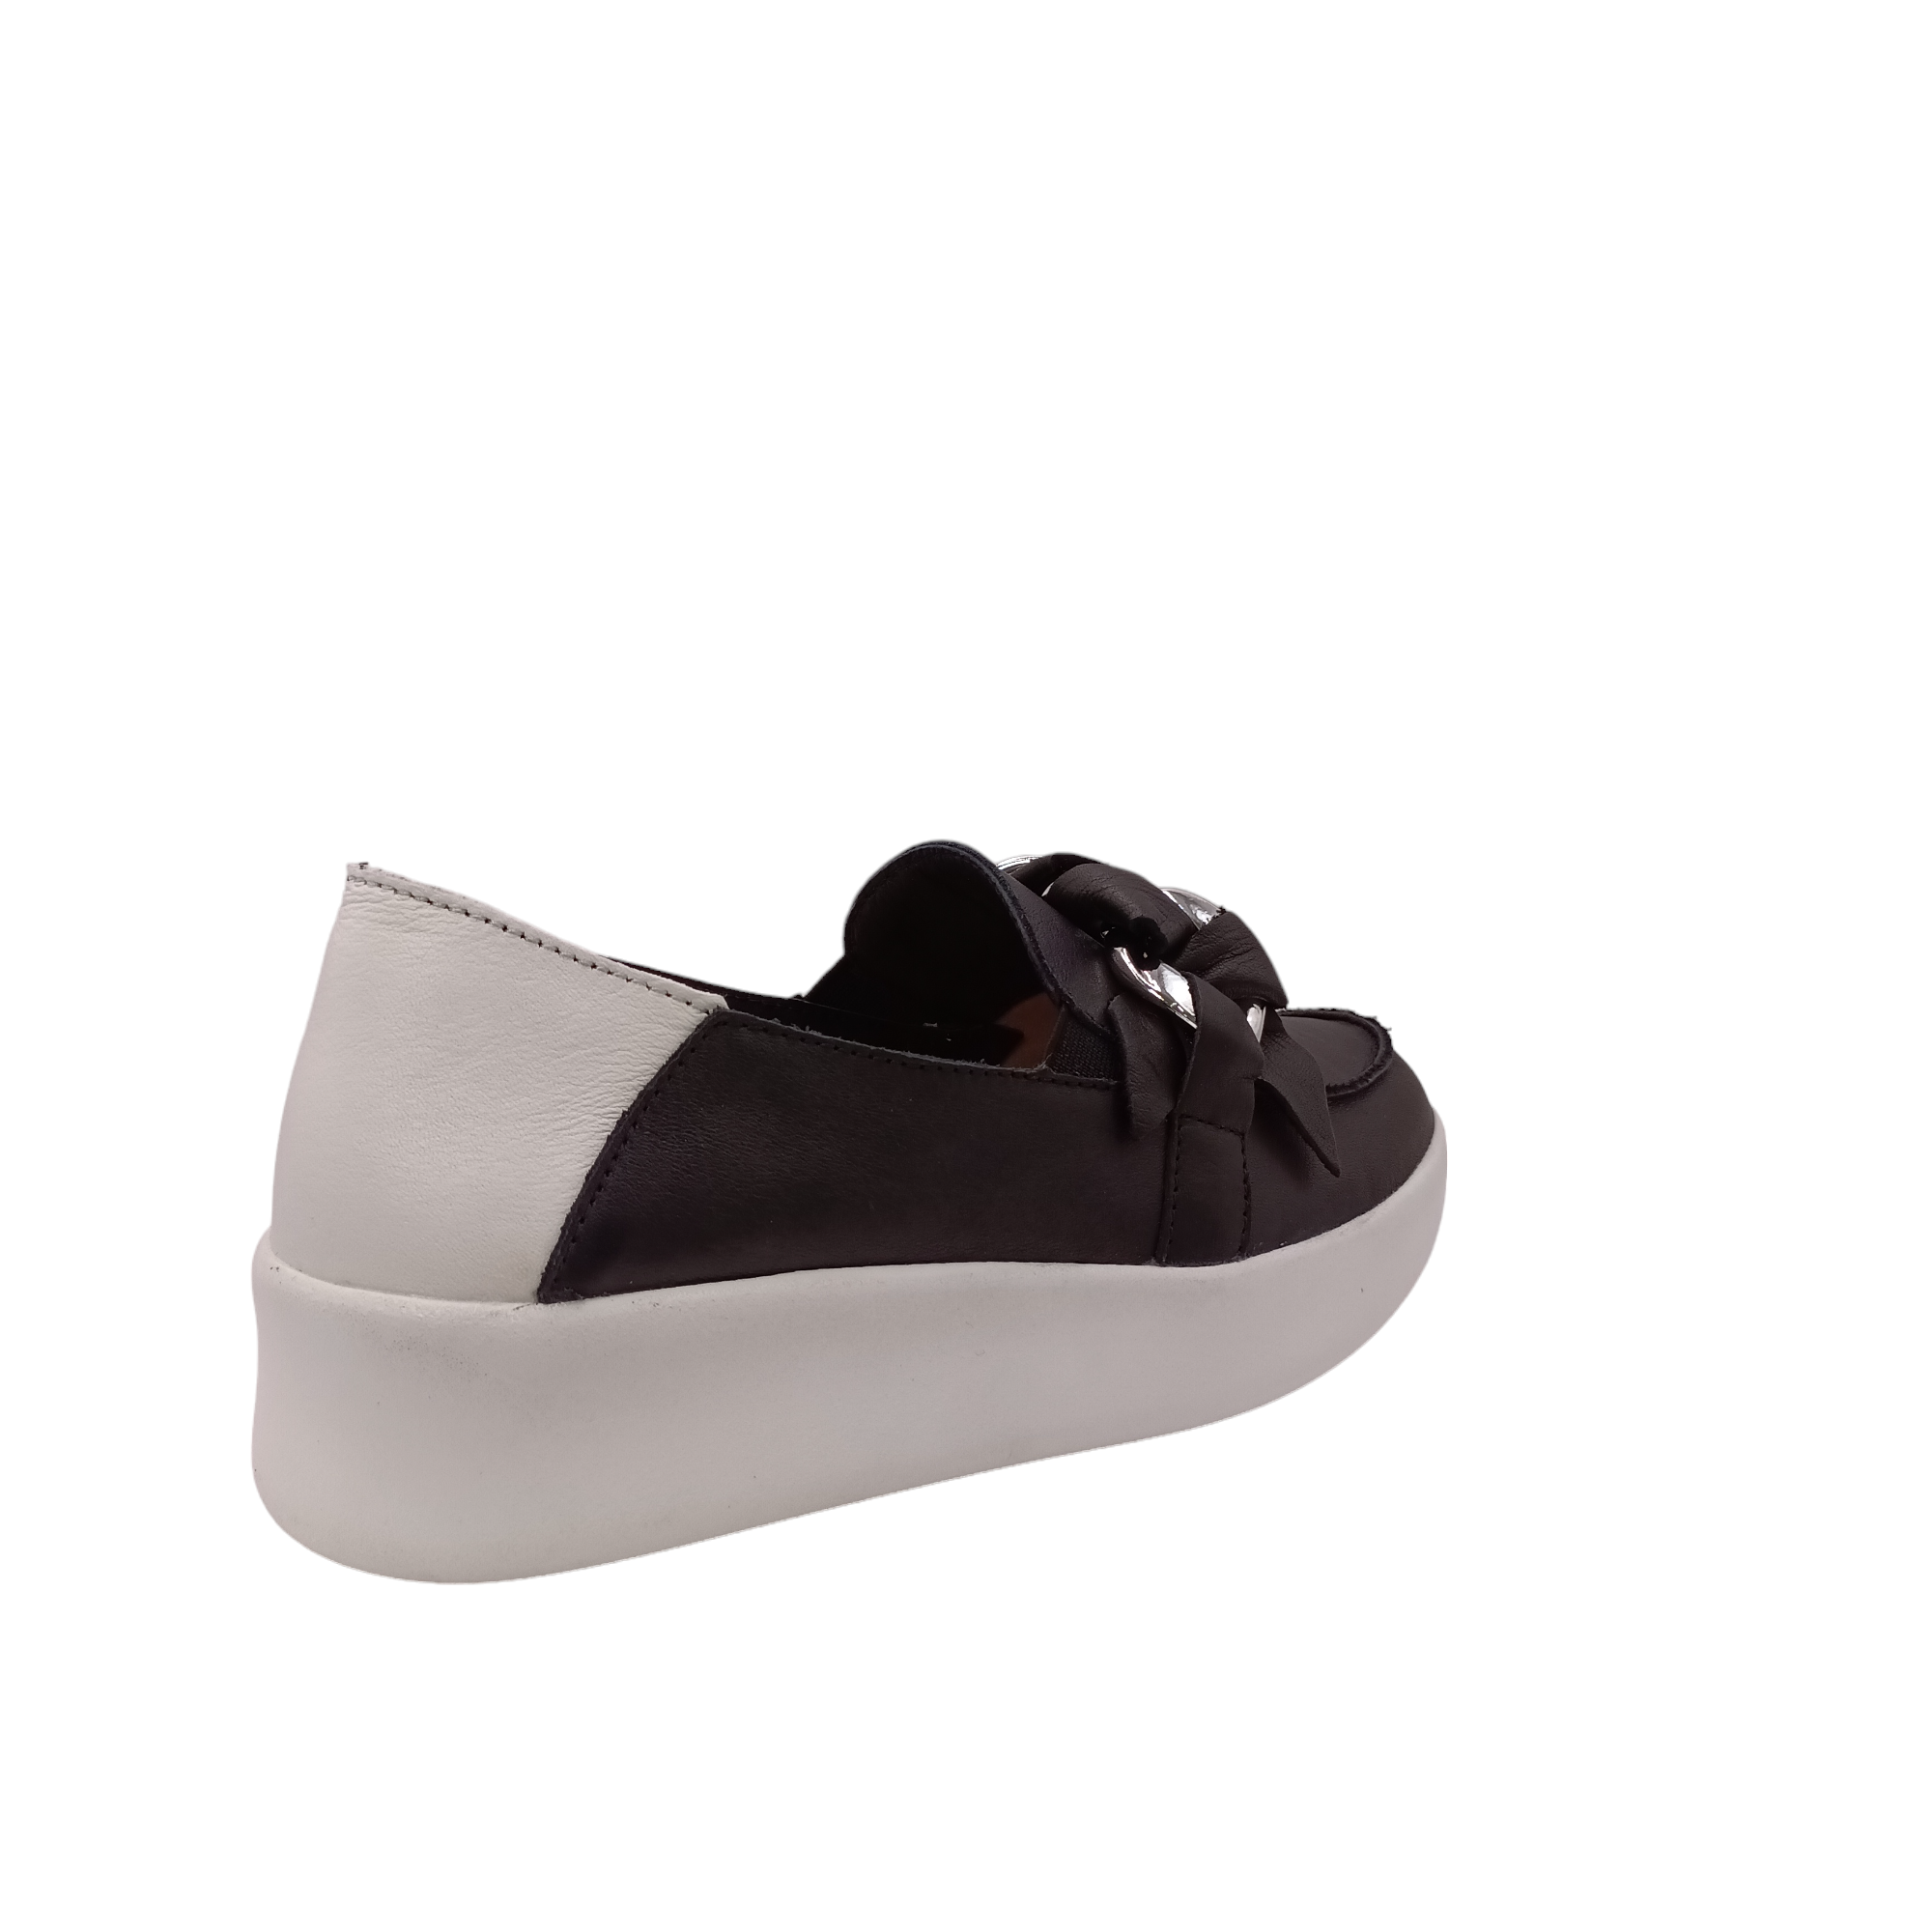 Back angled view of black slip on shoe called mafia from Alfie &amp; Evie. Black leather laced in silver chain decorating the top, white leather heel with a white sole. Shop Alfie &amp; Evie Womens Shoes online and In-Store with shoe&amp;me Mount Maunganui.